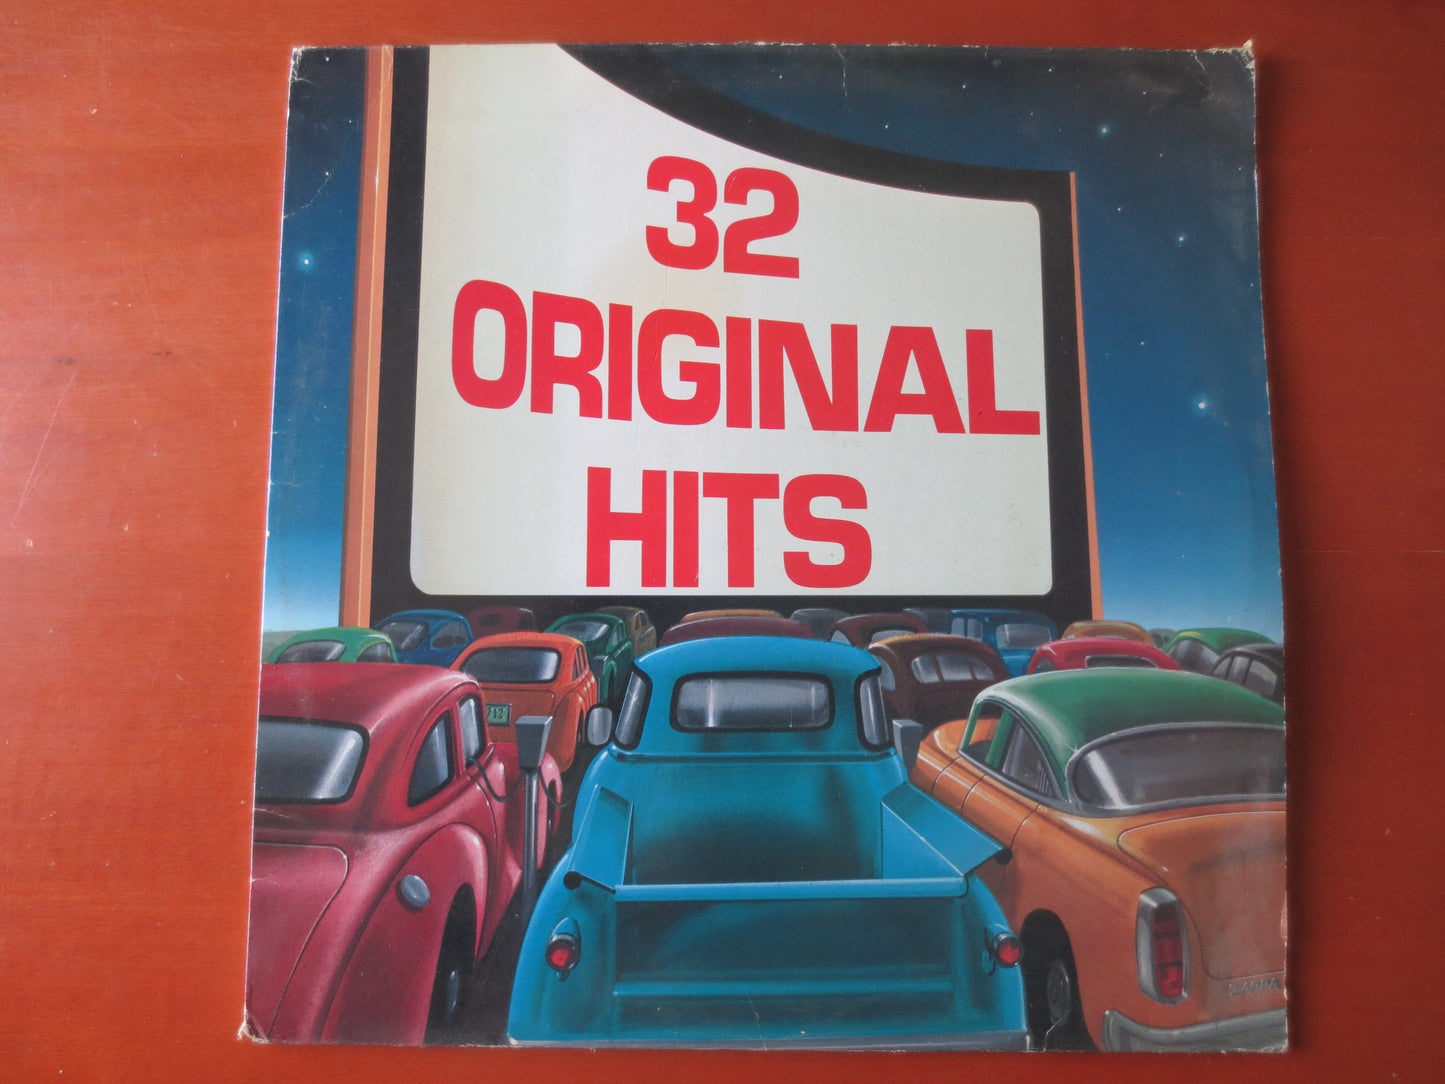 32 ORIGINAL HITS, 2 Records, Rock and Roll lps, Pop Record, Pop Vinyl, Vinyl lps, Pop lp, lps, Vintage Vinyl, 1982 Records